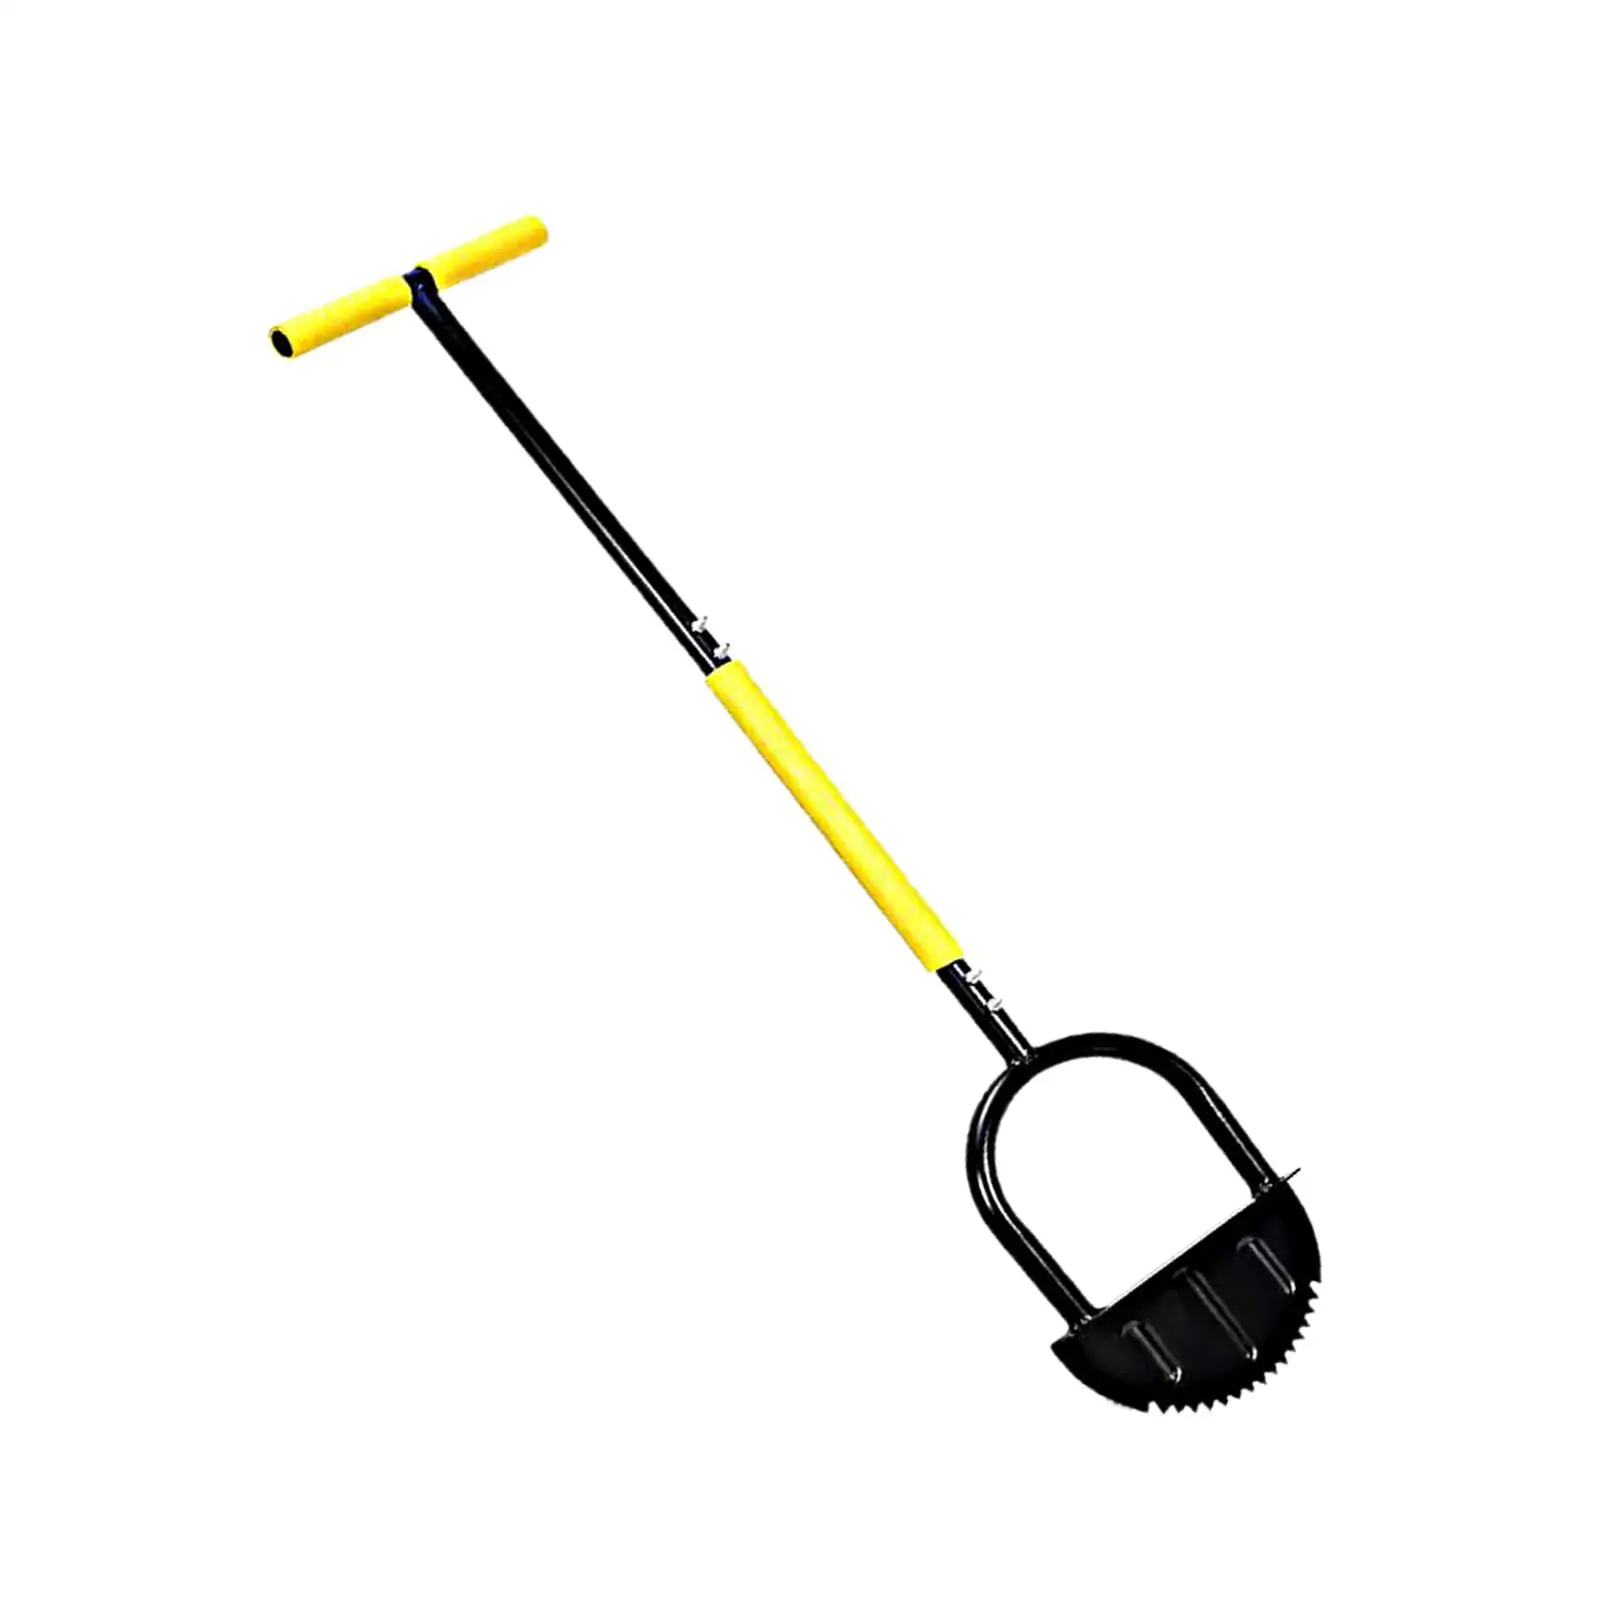 Lawn Edger with Handle Garden Trimming Edging Tool Manual Lawn Edger with Saw for Cleaning Edges Garden Flower Beds Landscaping